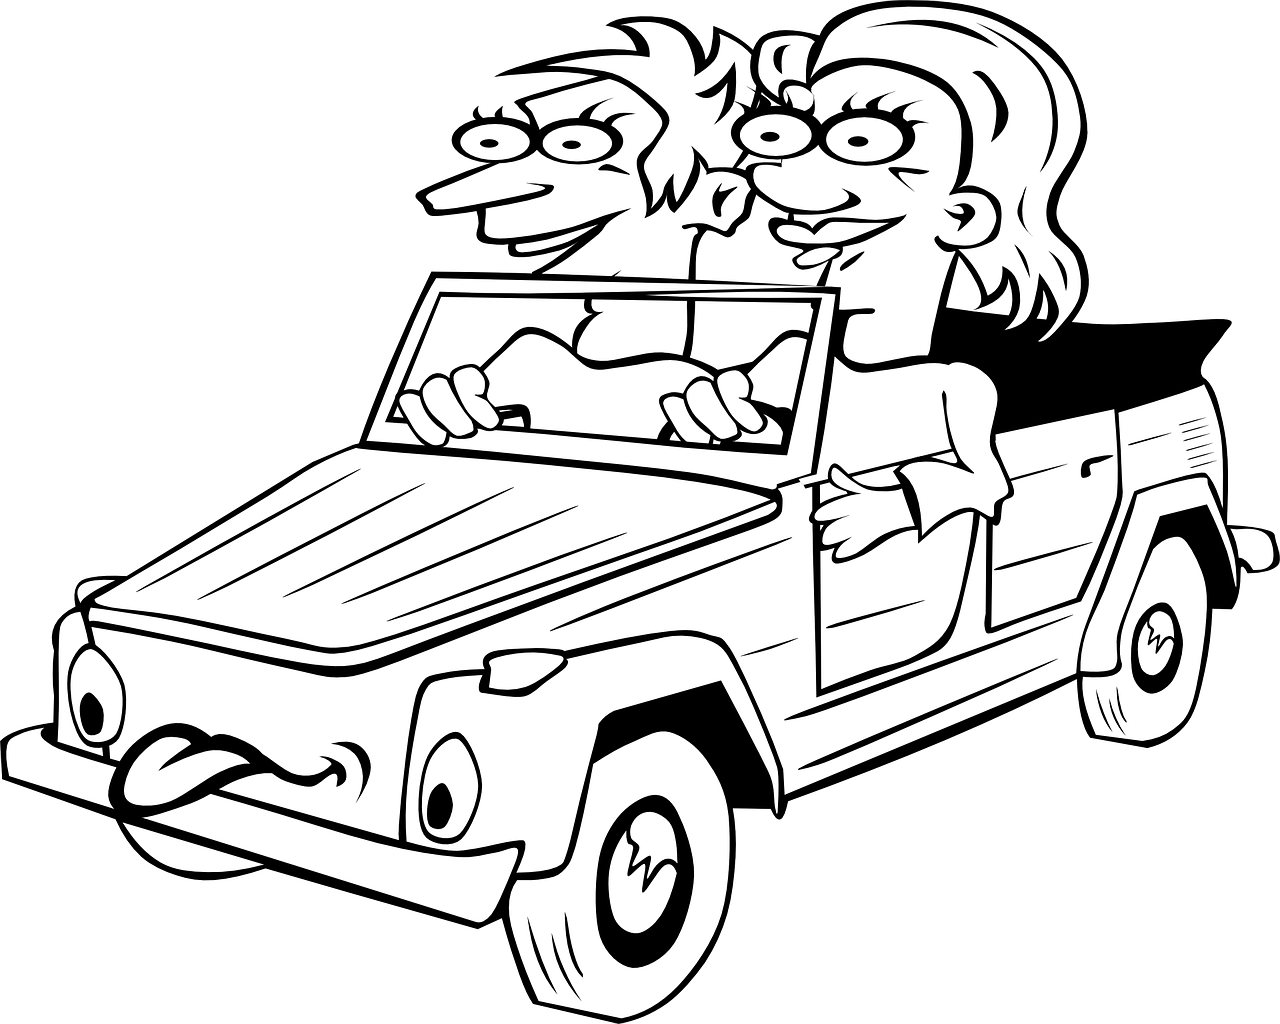 man,woman,car,driving,couple,happy,cartoons,free vector graphics,free pictures, free photos, free images, royalty free, free illustrations, public domain